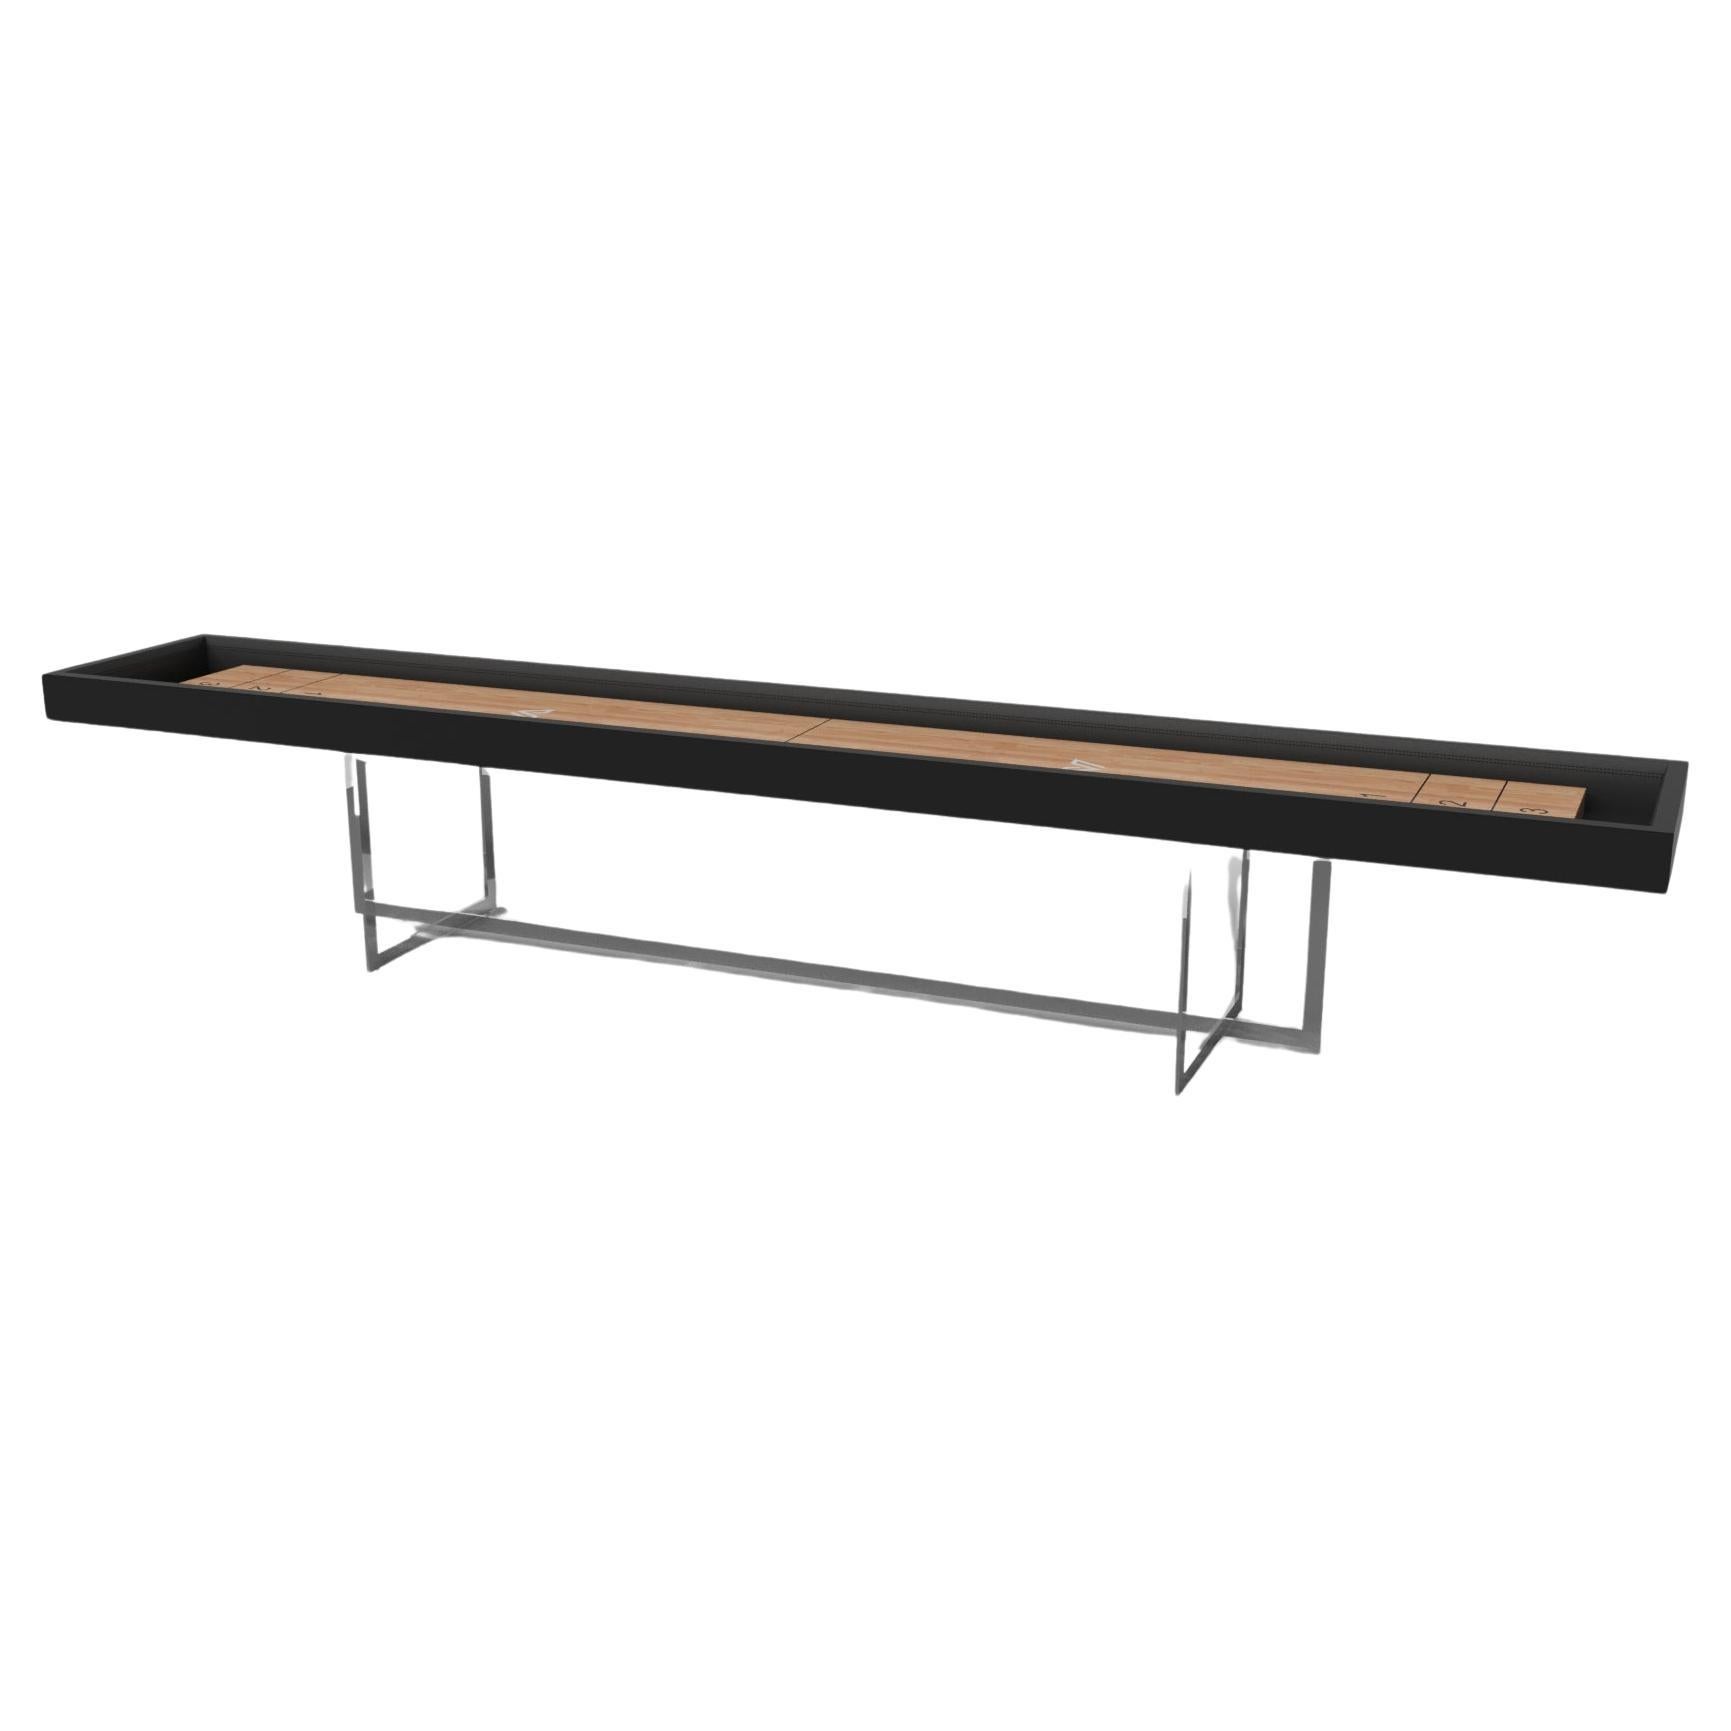 Elevate Customs Vogue Shuffleboard Tables /Solid Pantone Black Color in 14' -USA